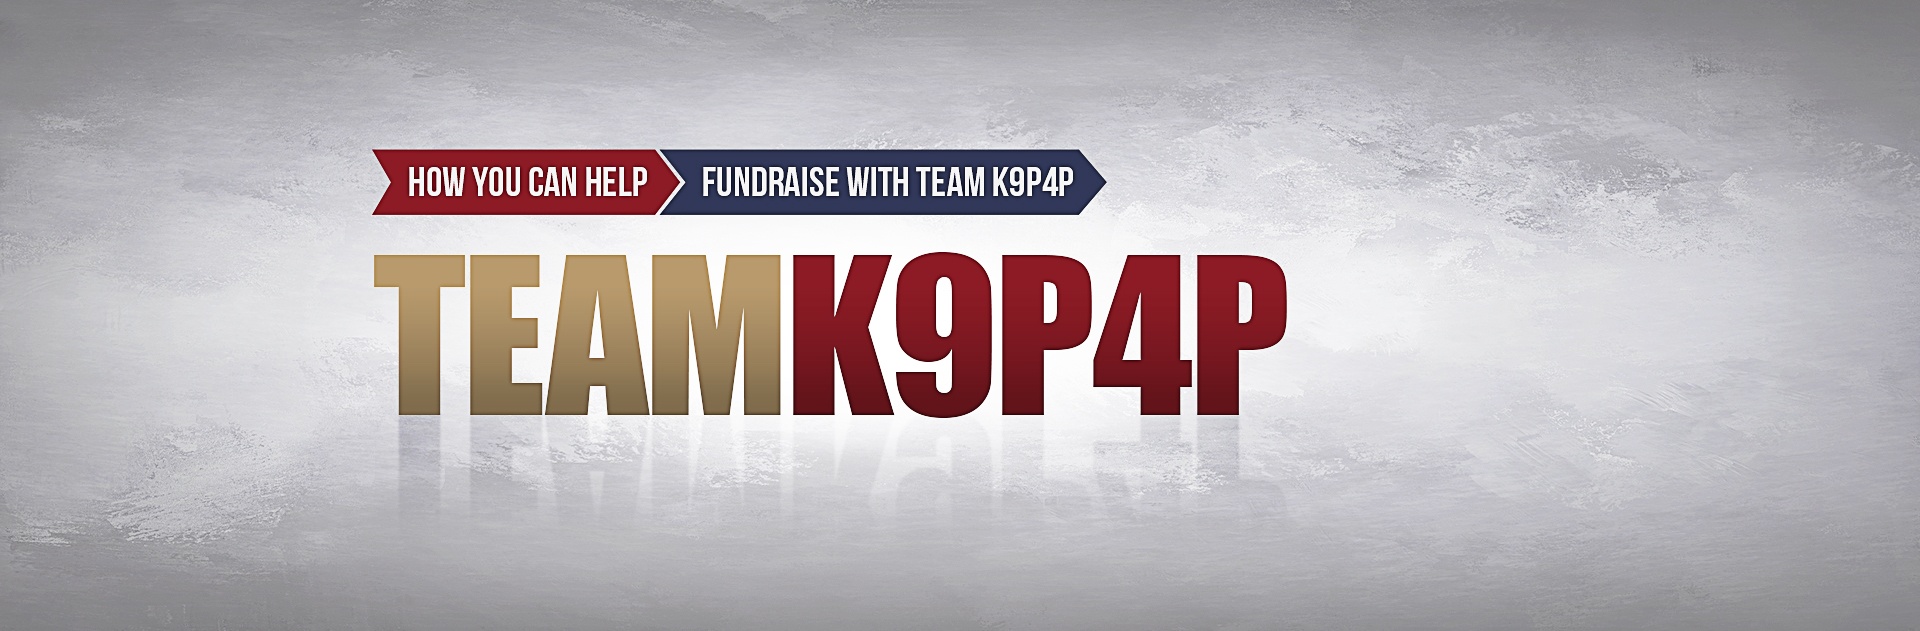 Team K9P4P How You Can Help